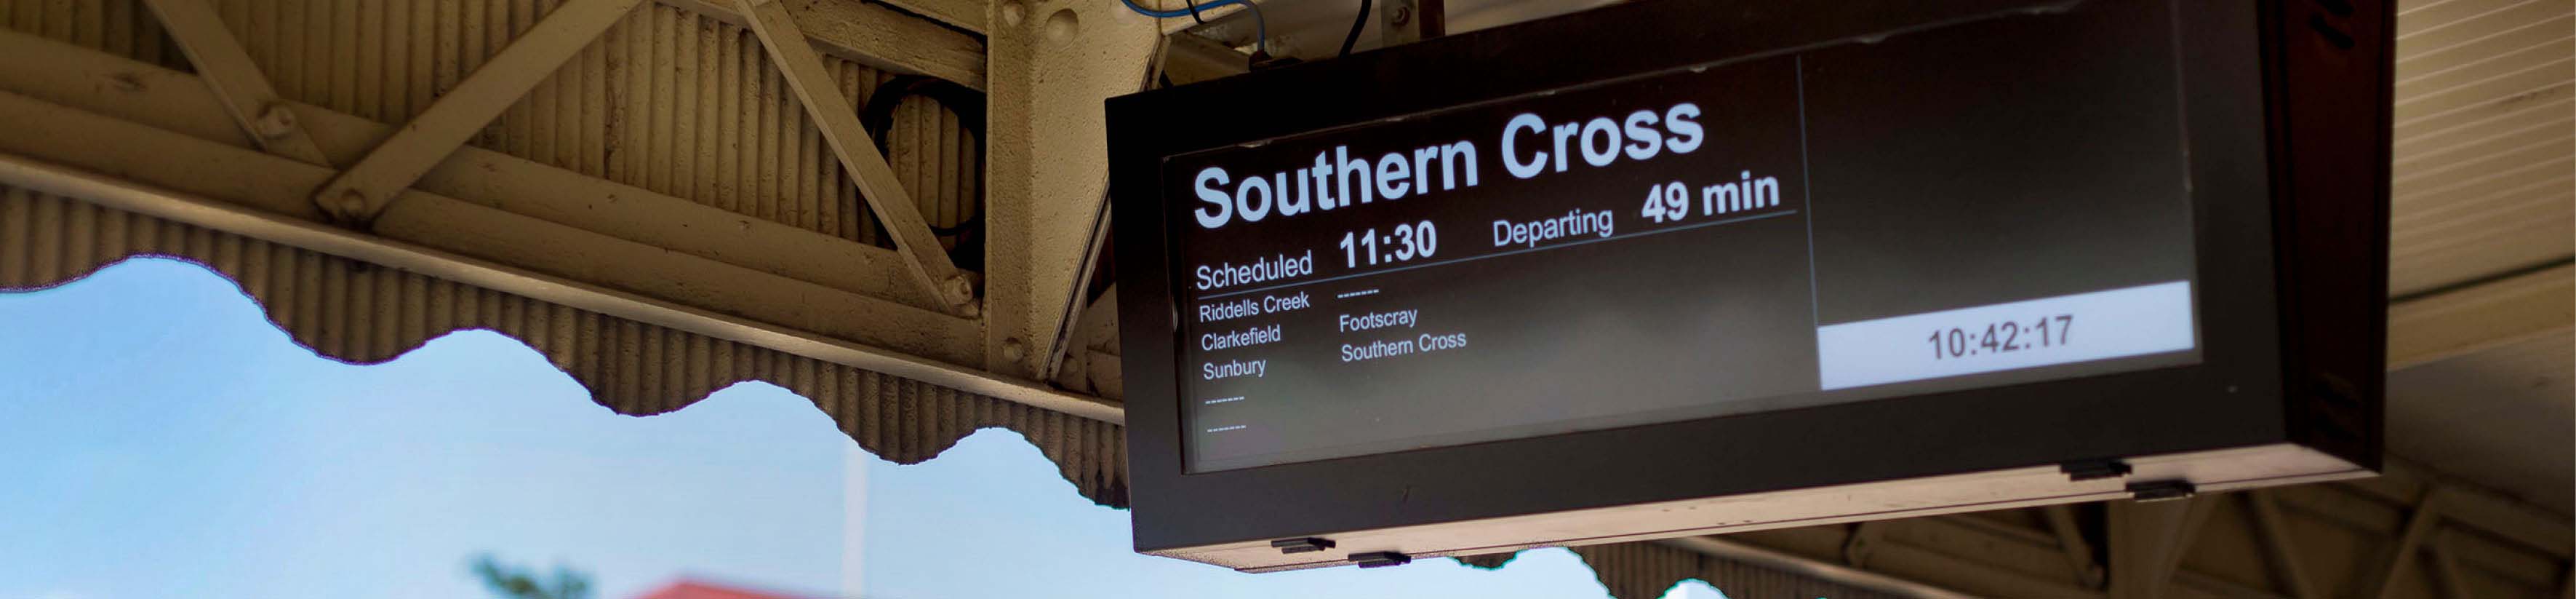 A passenger information display at a train station. It shows that the next train to Southern Cross will arrive at 11.30am.